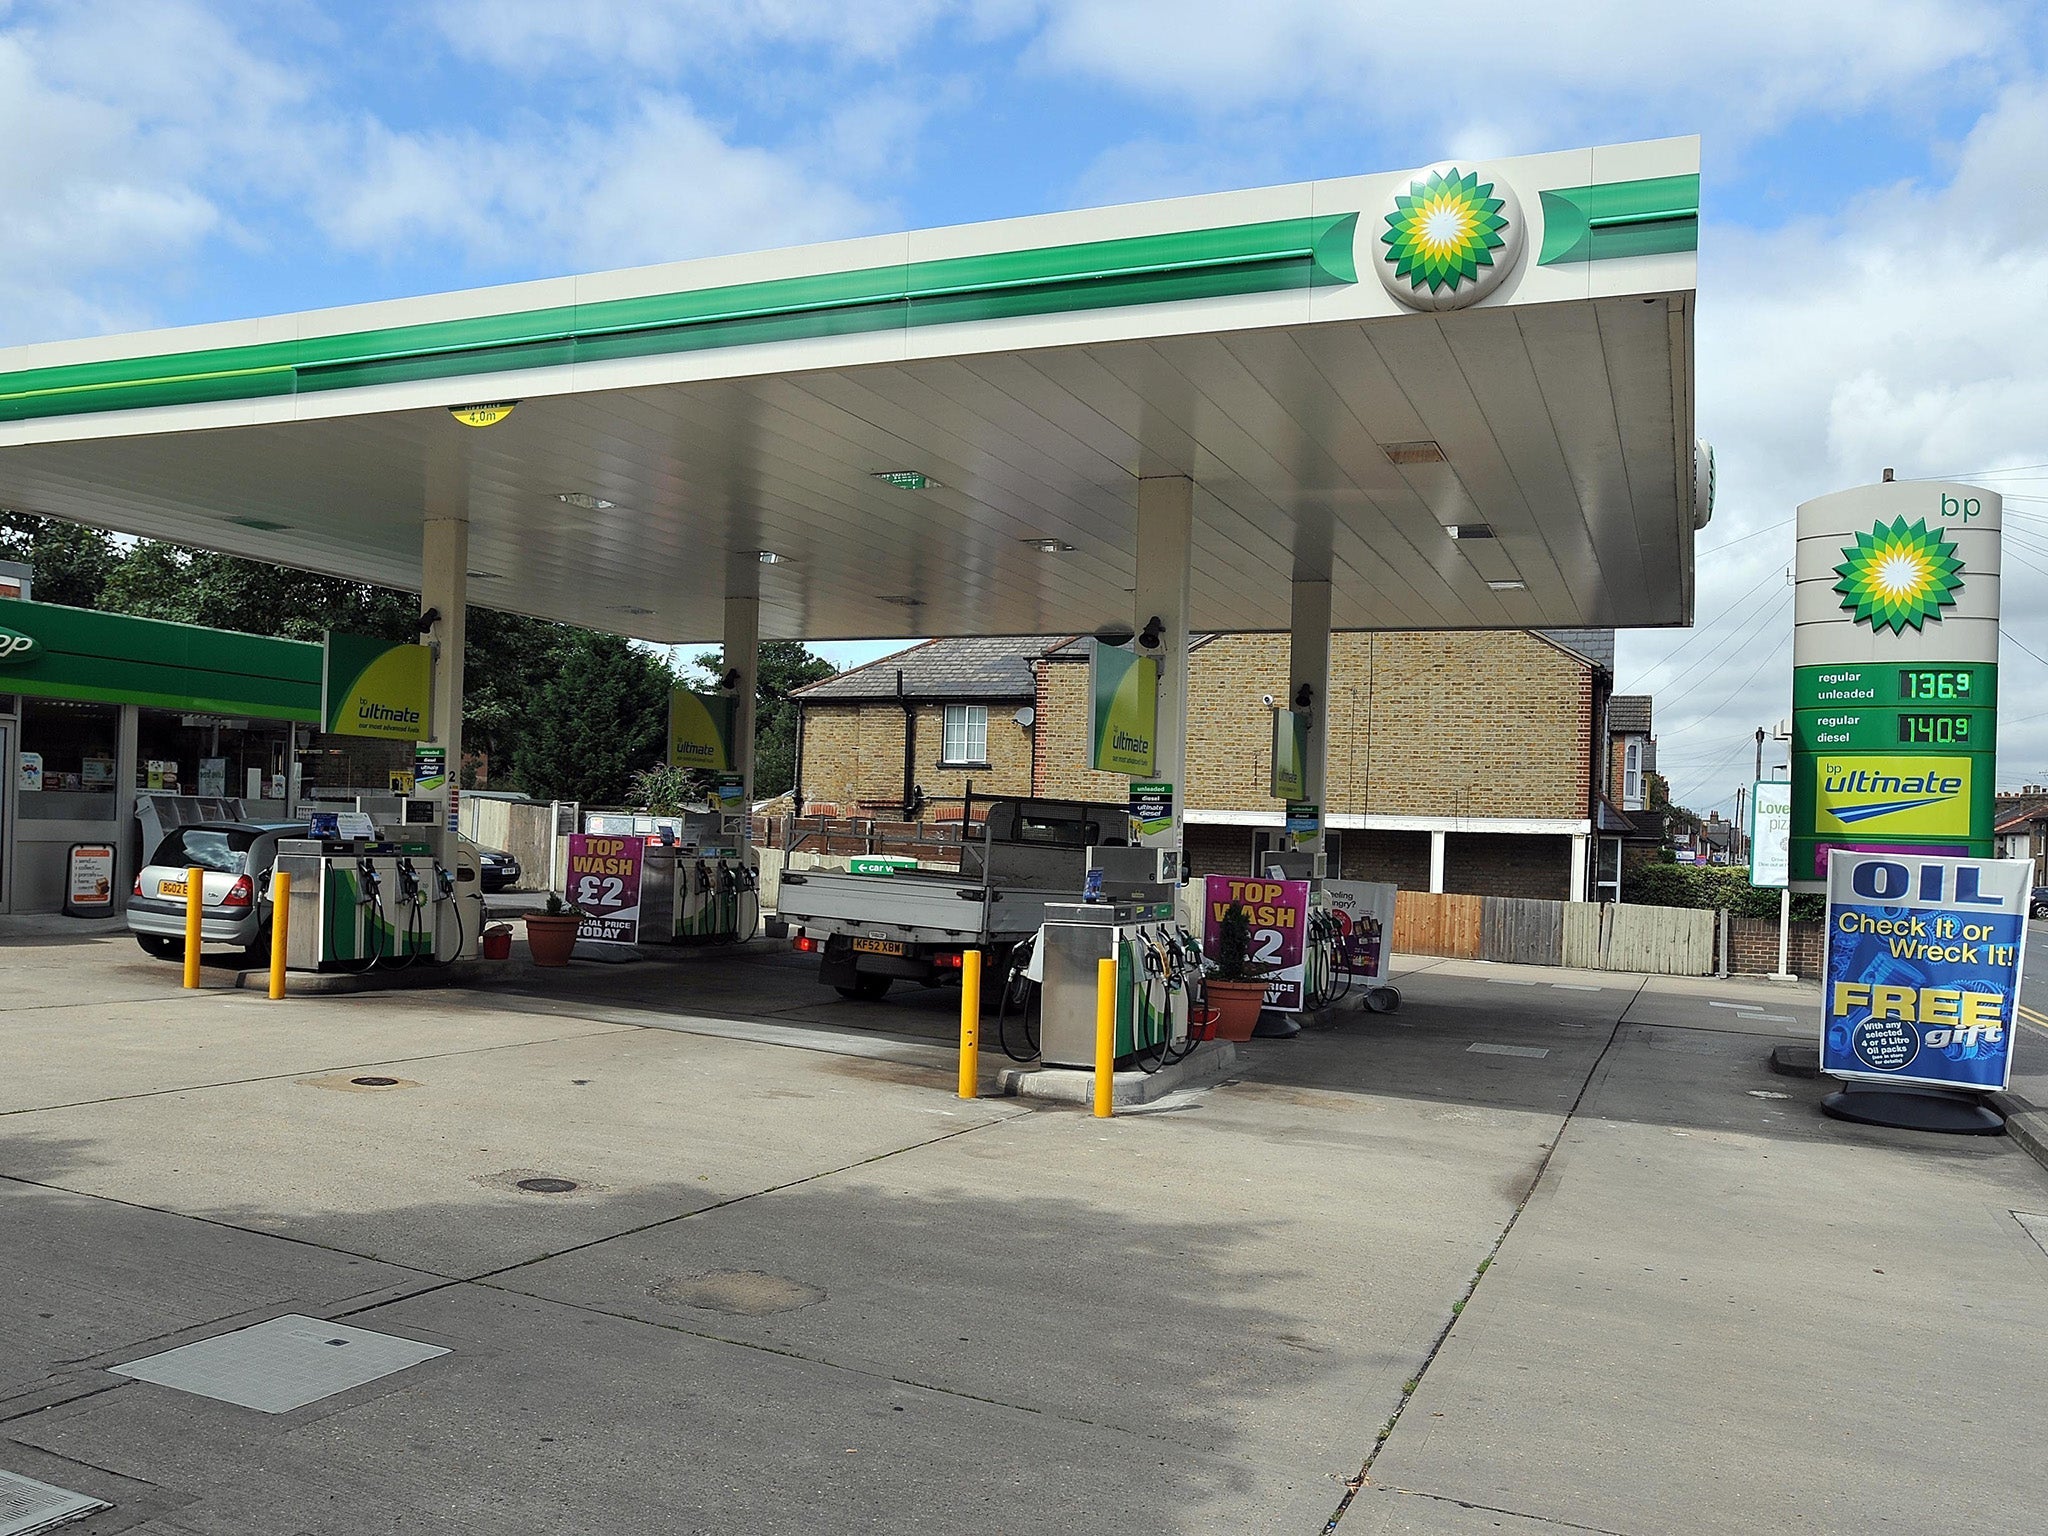 A view of the BP petrol station in Chelmsford where John Pordage was killed